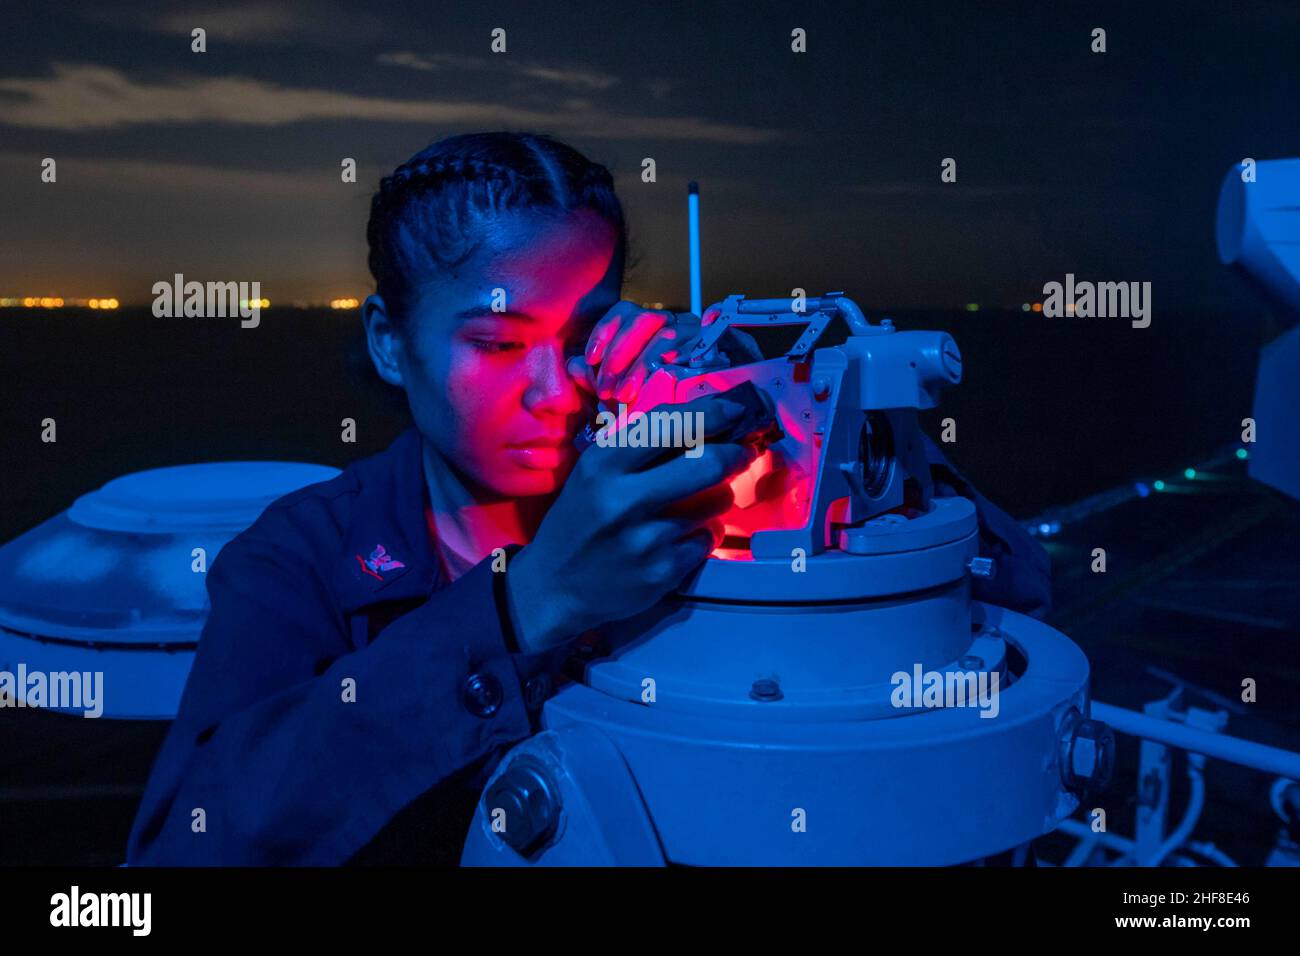 Jan 11, 2022 - STRAIT OF MALACCA - Quartermaster 3rd Class Orpha Hapdei, from Yap, Micronesia, uses a telescopic alidade aboard the amphibious assault ship USS Essex (LHD 2) during strait transit operations, Jan. 11, 2022. Essex, flagship of the Essex Amphibious Ready Group (ARG), along with the 11th Marine Expeditionary Unit (MEU), is operating in the U.S. 7th Fleet area of operations to enhance interoperability with alliances and partners and serve as a ready response force to ensure maritime security and a free and open Indo-Pacific region. (Credit Image: © Brett McMinoway/U.S. Navy/ZUMA Pr Stock Photo